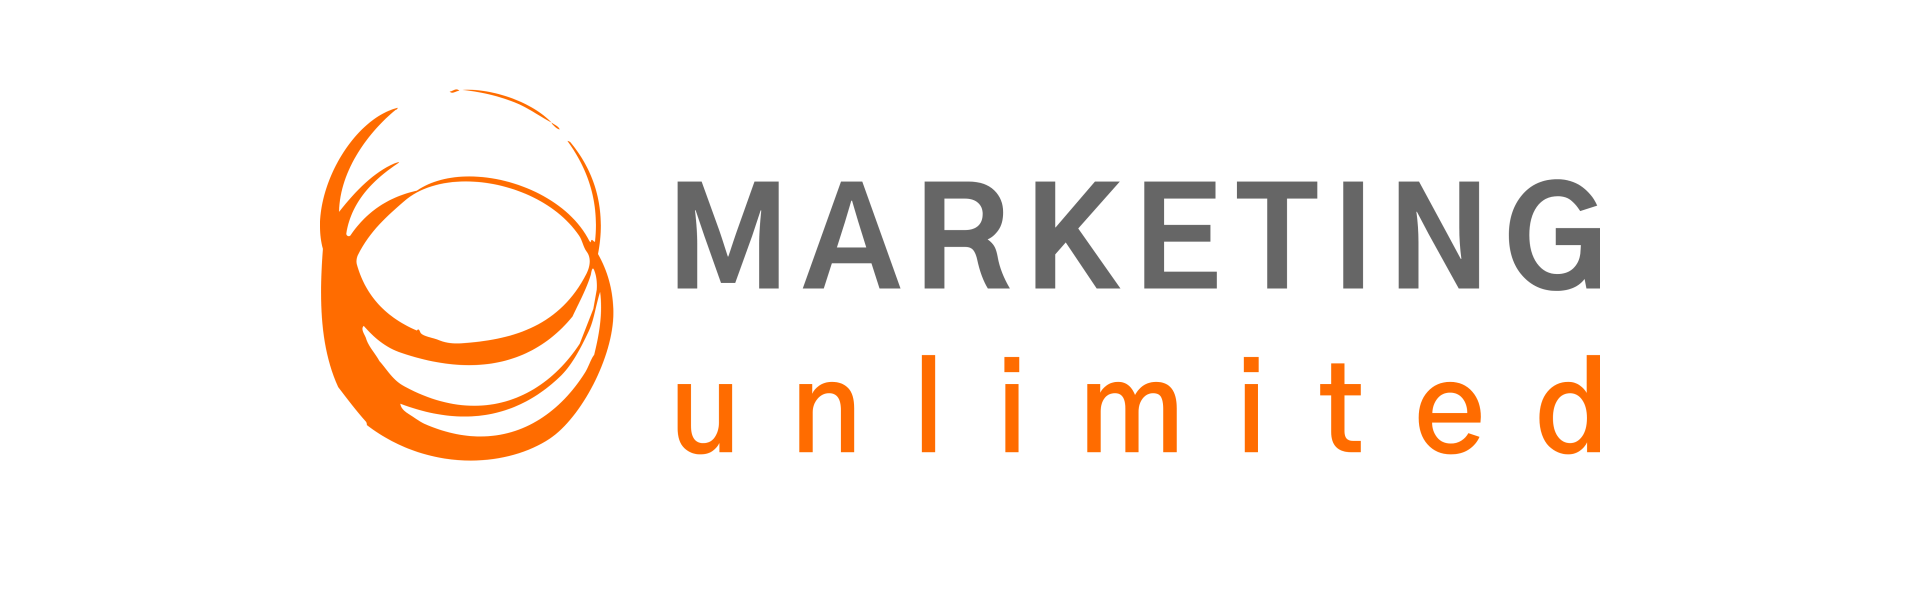 Marketing unlimited | Claudia Isabel Knoll